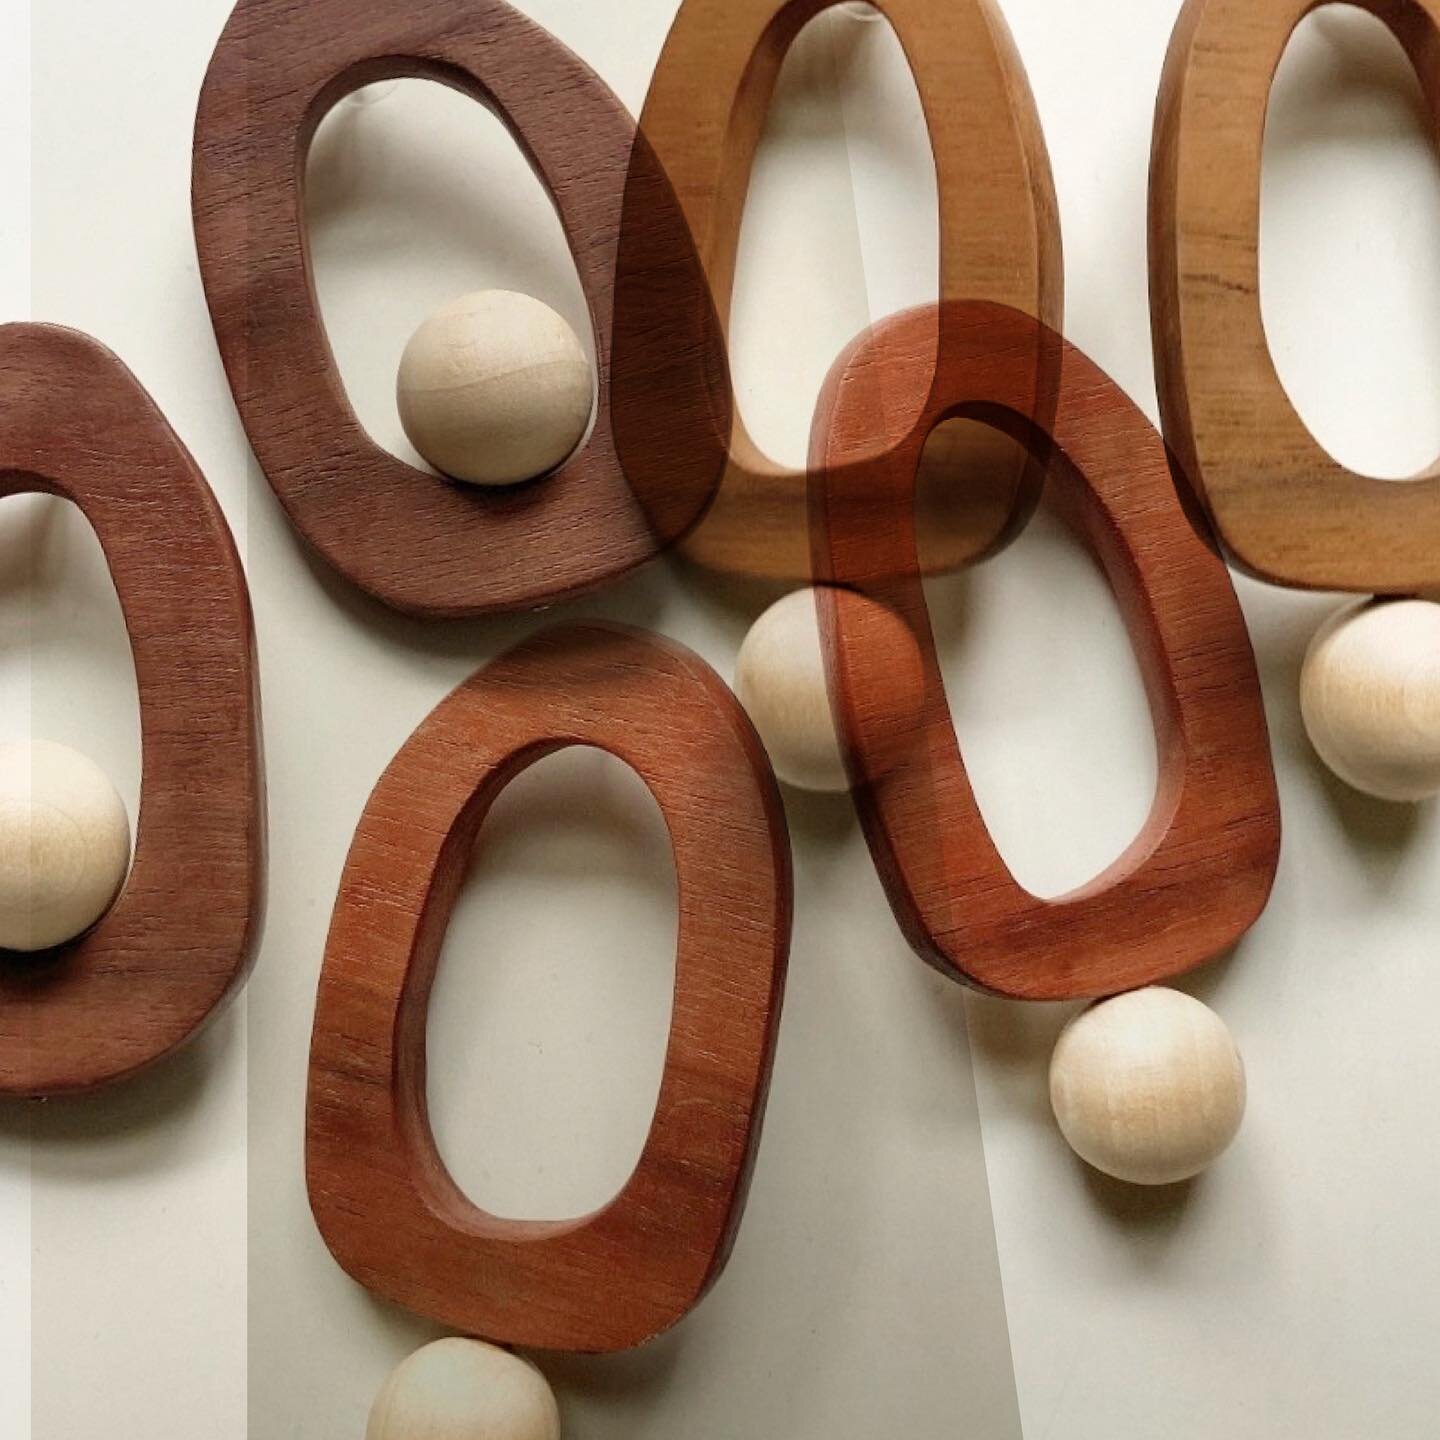 Somma Ball + Somma Sphere &bull; Sculptural, organic shape wood hoops. Each pair are individually hand cut and formed from reclaimed cherry and walnut. Not only are no two pair identical, the pairs themselves are not perfectly symmetrical lending fur